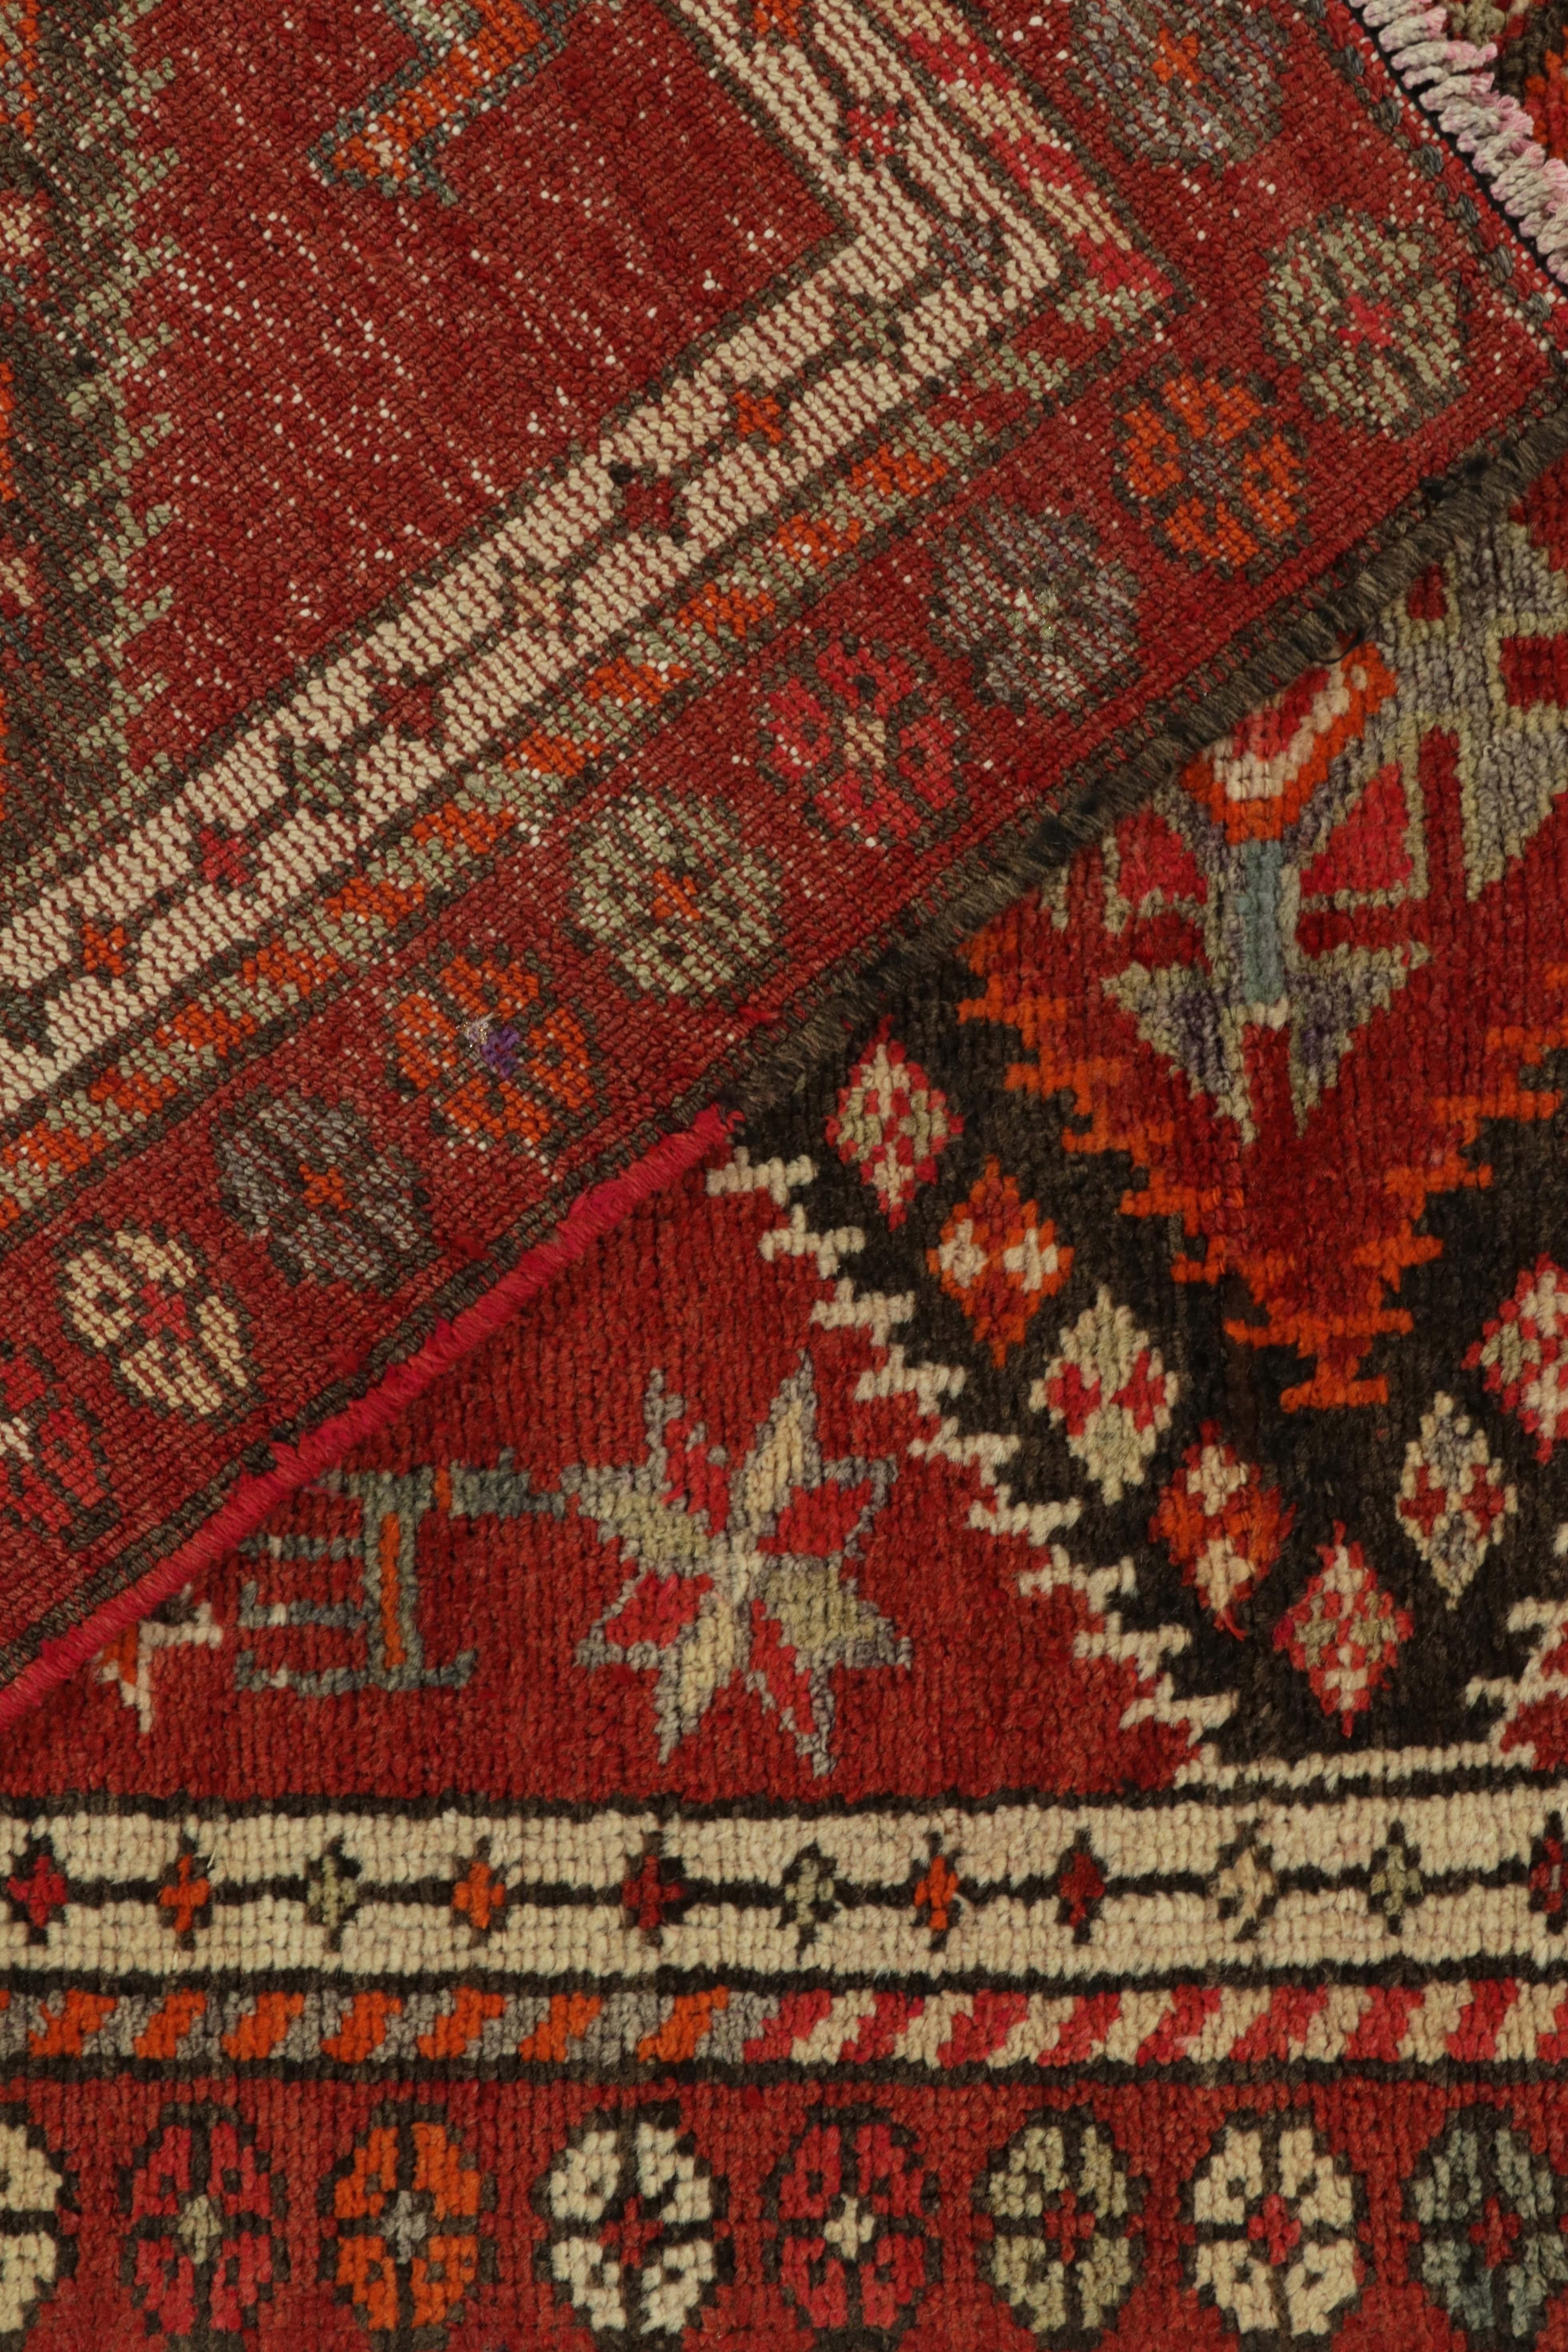 1950s Vintage Tribal Runner in Red, Orange Geometric Patterns by Rug & Kilim In Good Condition For Sale In Long Island City, NY